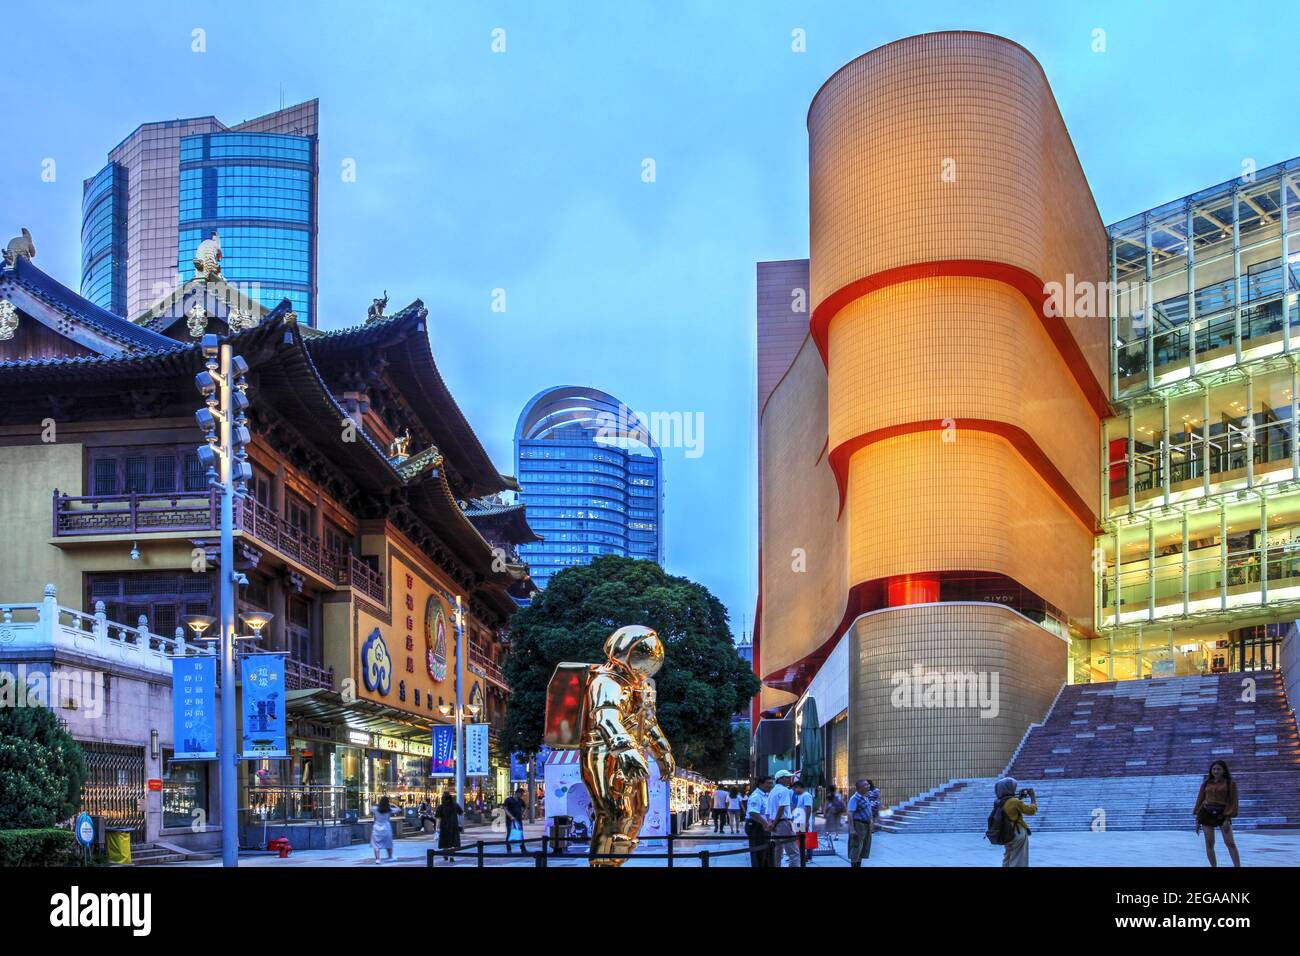 Night scene with the Jing'an Temple and the adjoing Joinbuy Shopping Mall in Shanghai, China at evening time. Stock Photo